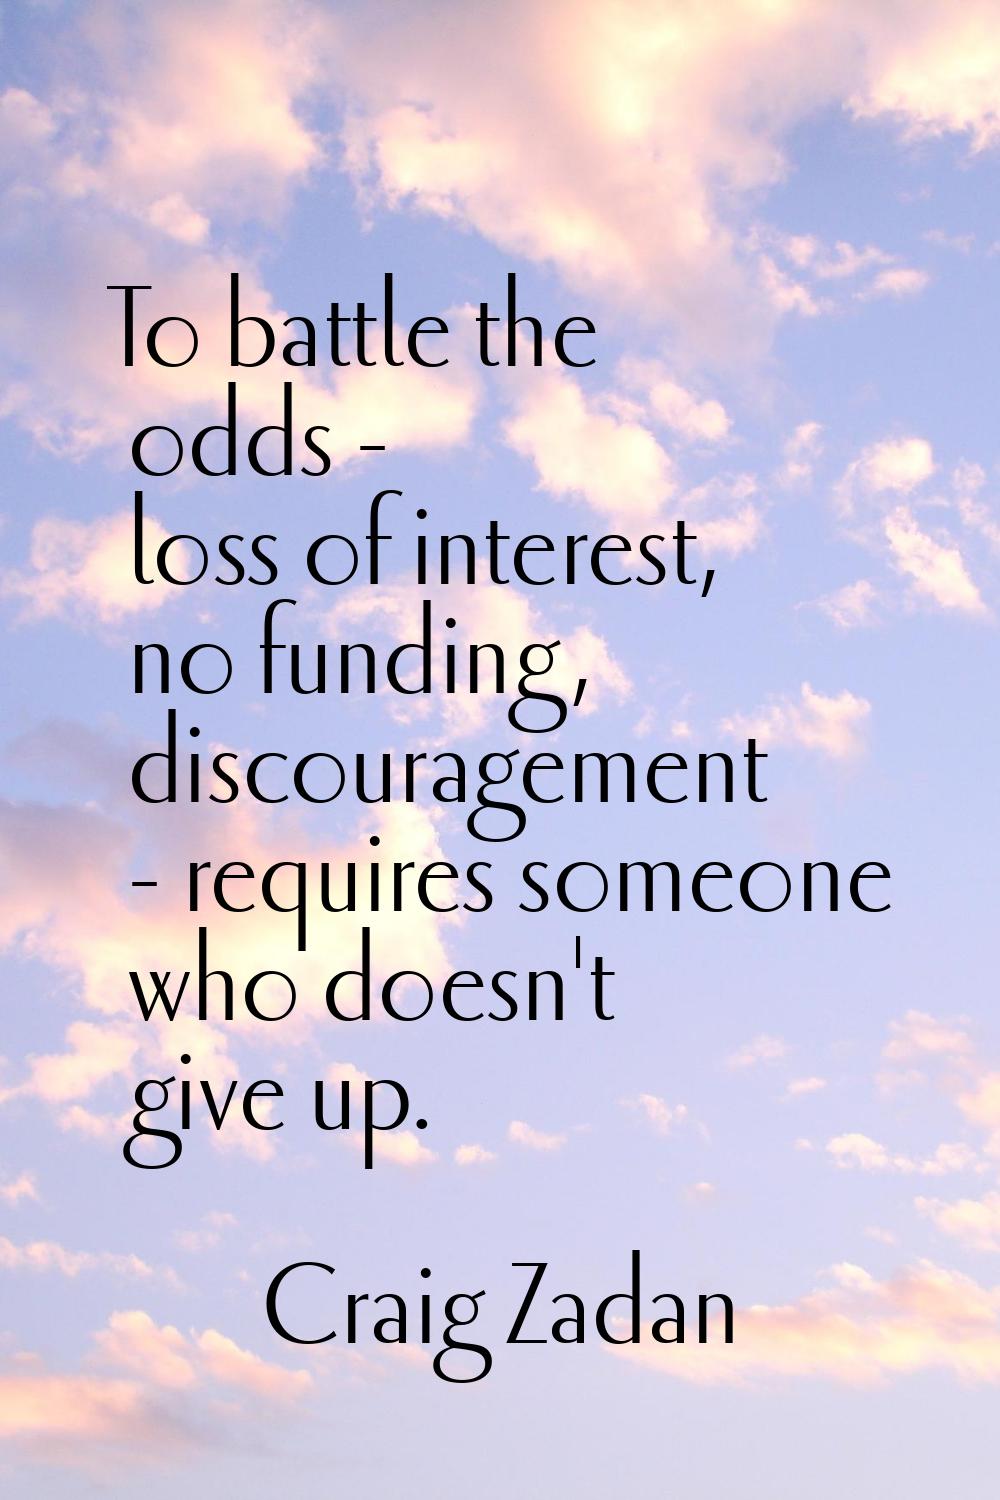 To battle the odds - loss of interest, no funding, discouragement - requires someone who doesn't gi